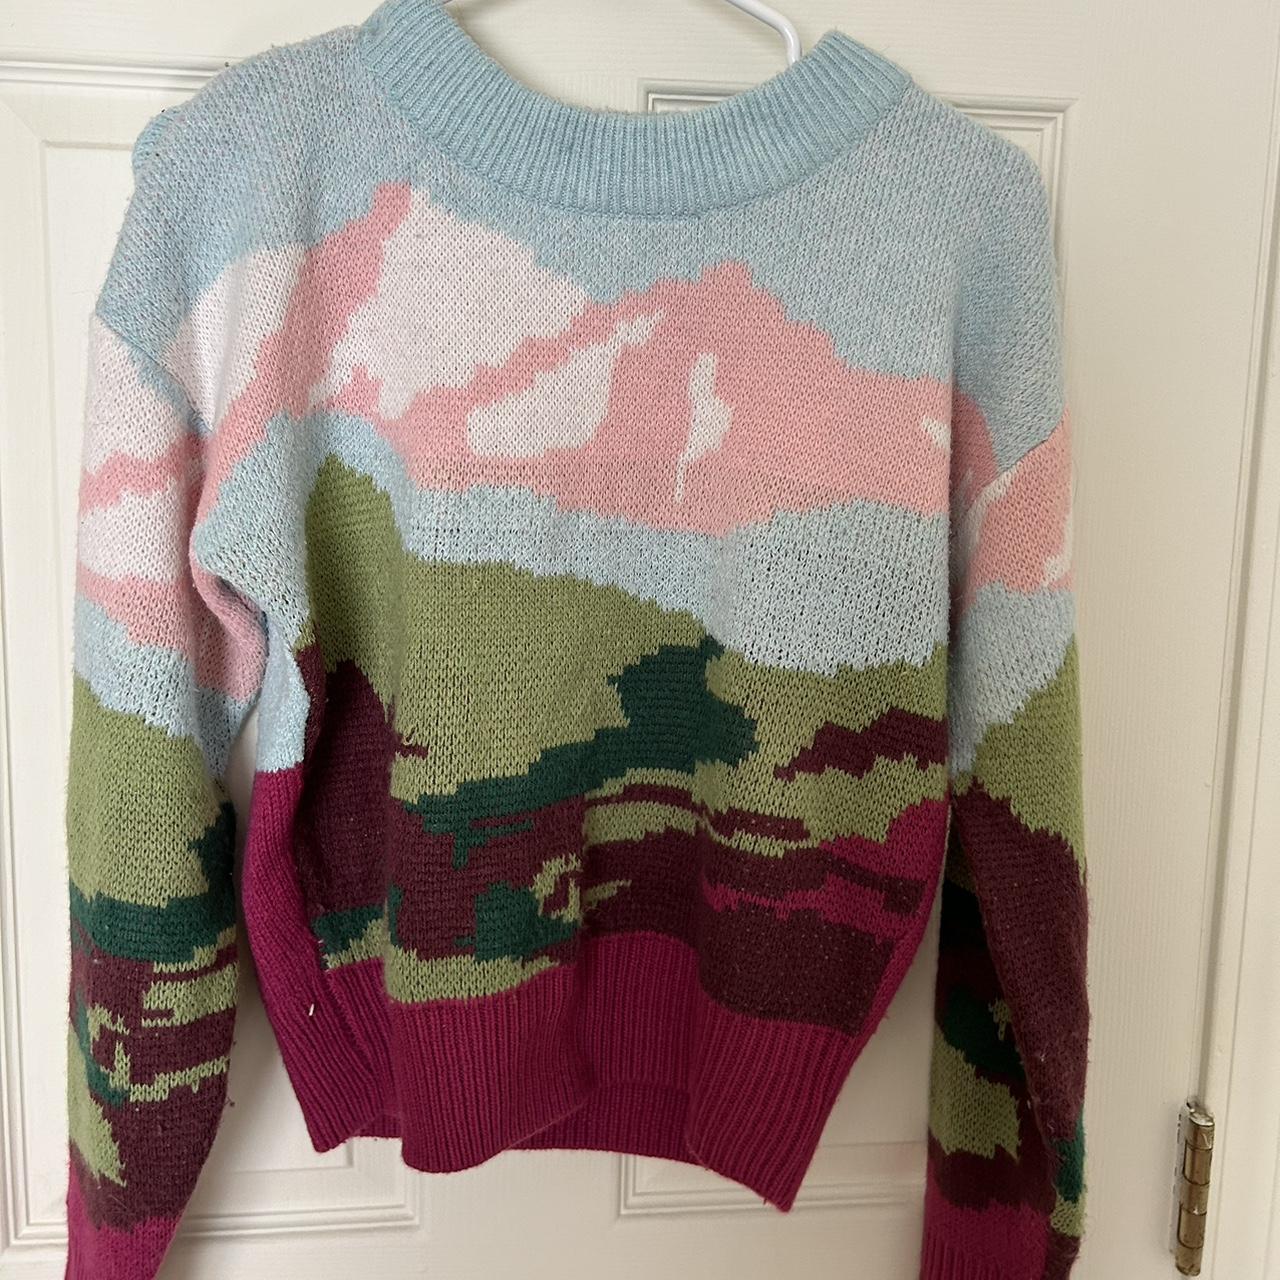 wild fable sweater. super comfy and never worn! i - Depop